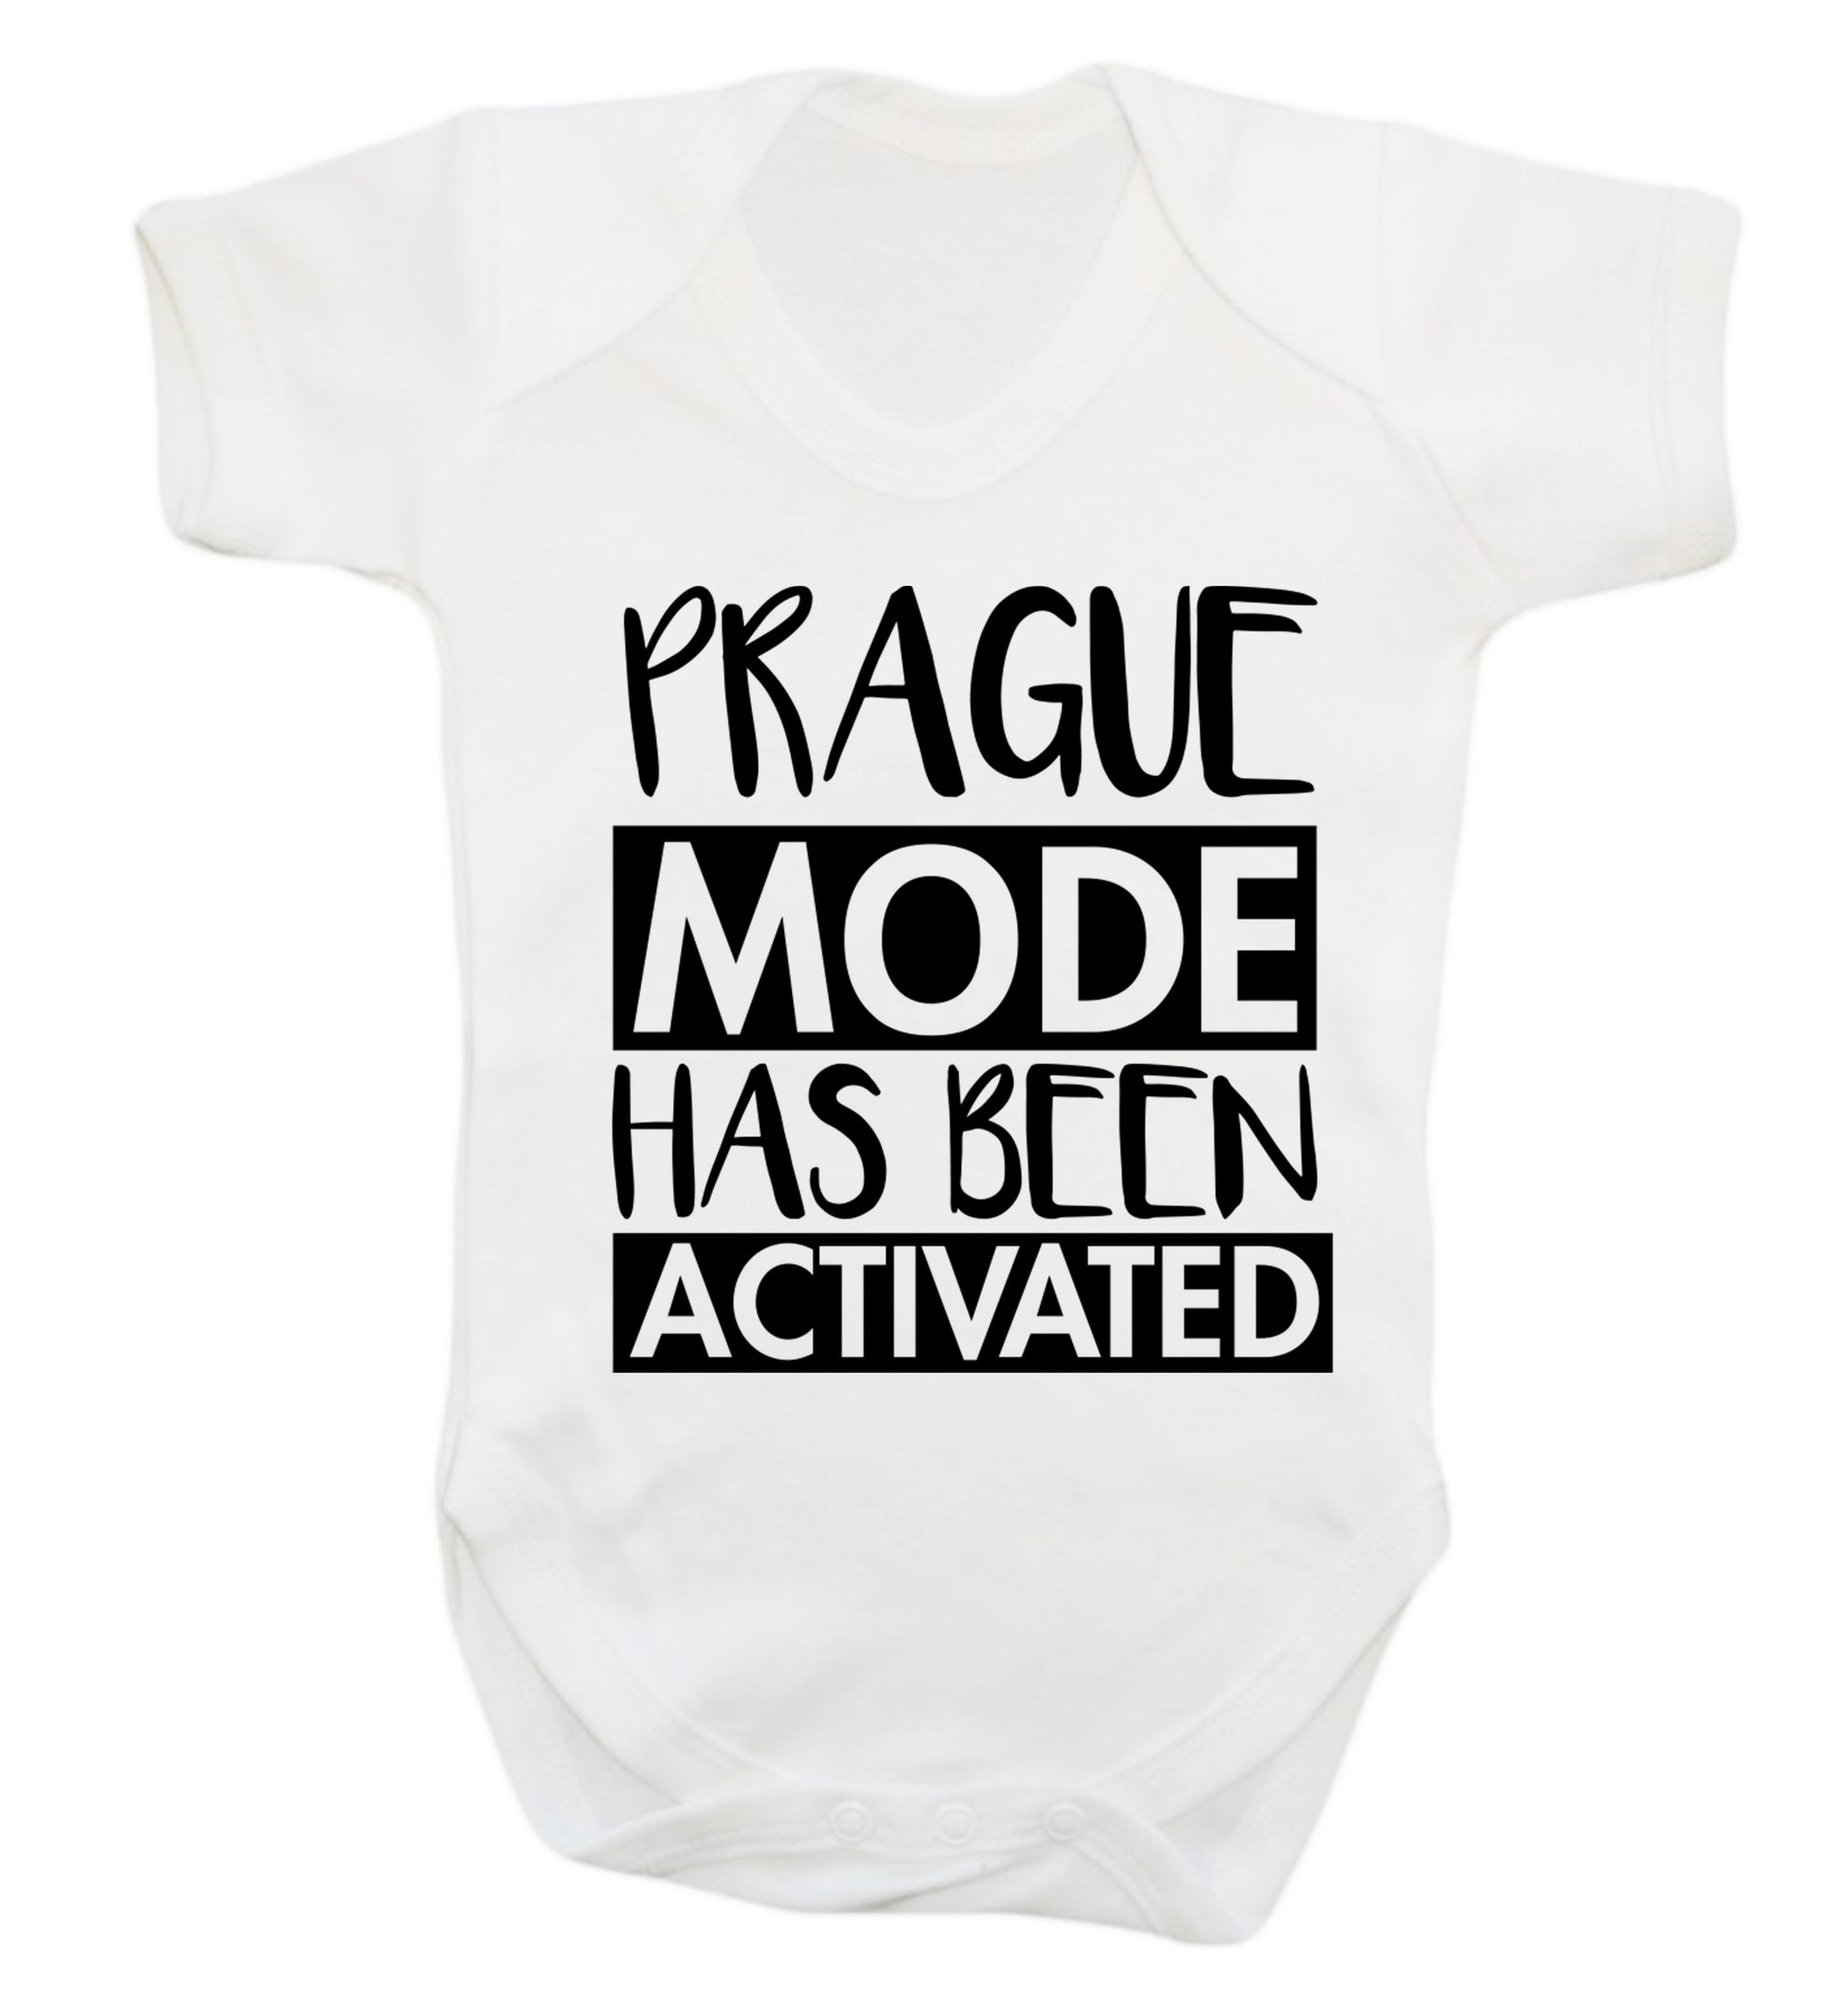 Prague mode has been activated Baby Vest white 18-24 months